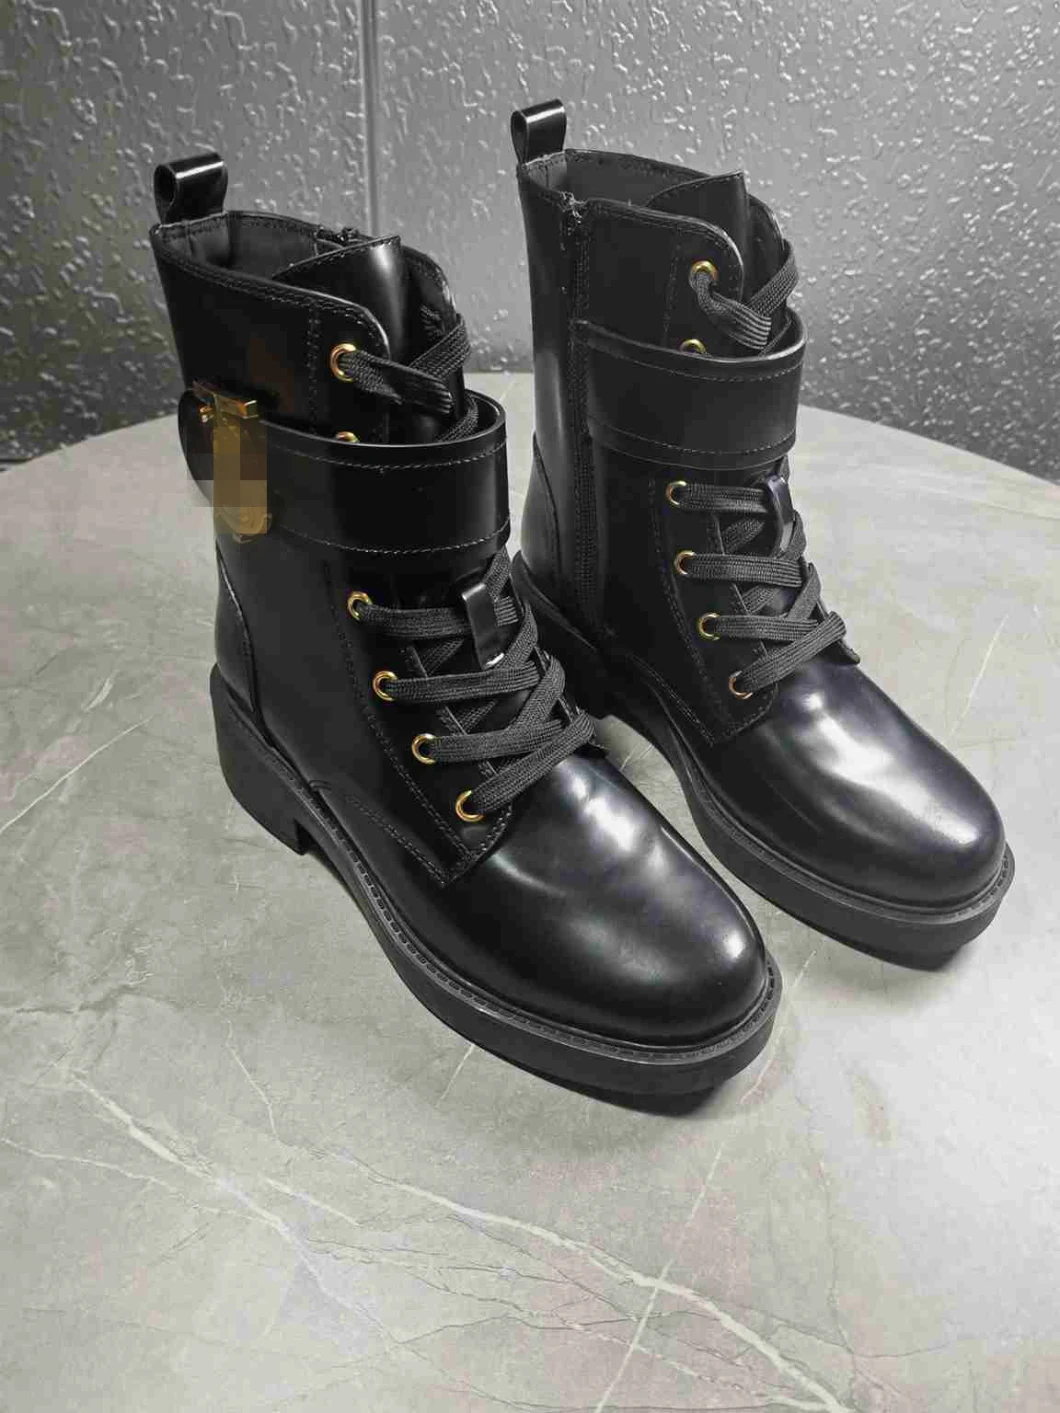 Brand New High Heel Short Boots Women Leather Ankle Boots for Women Pointed Toe